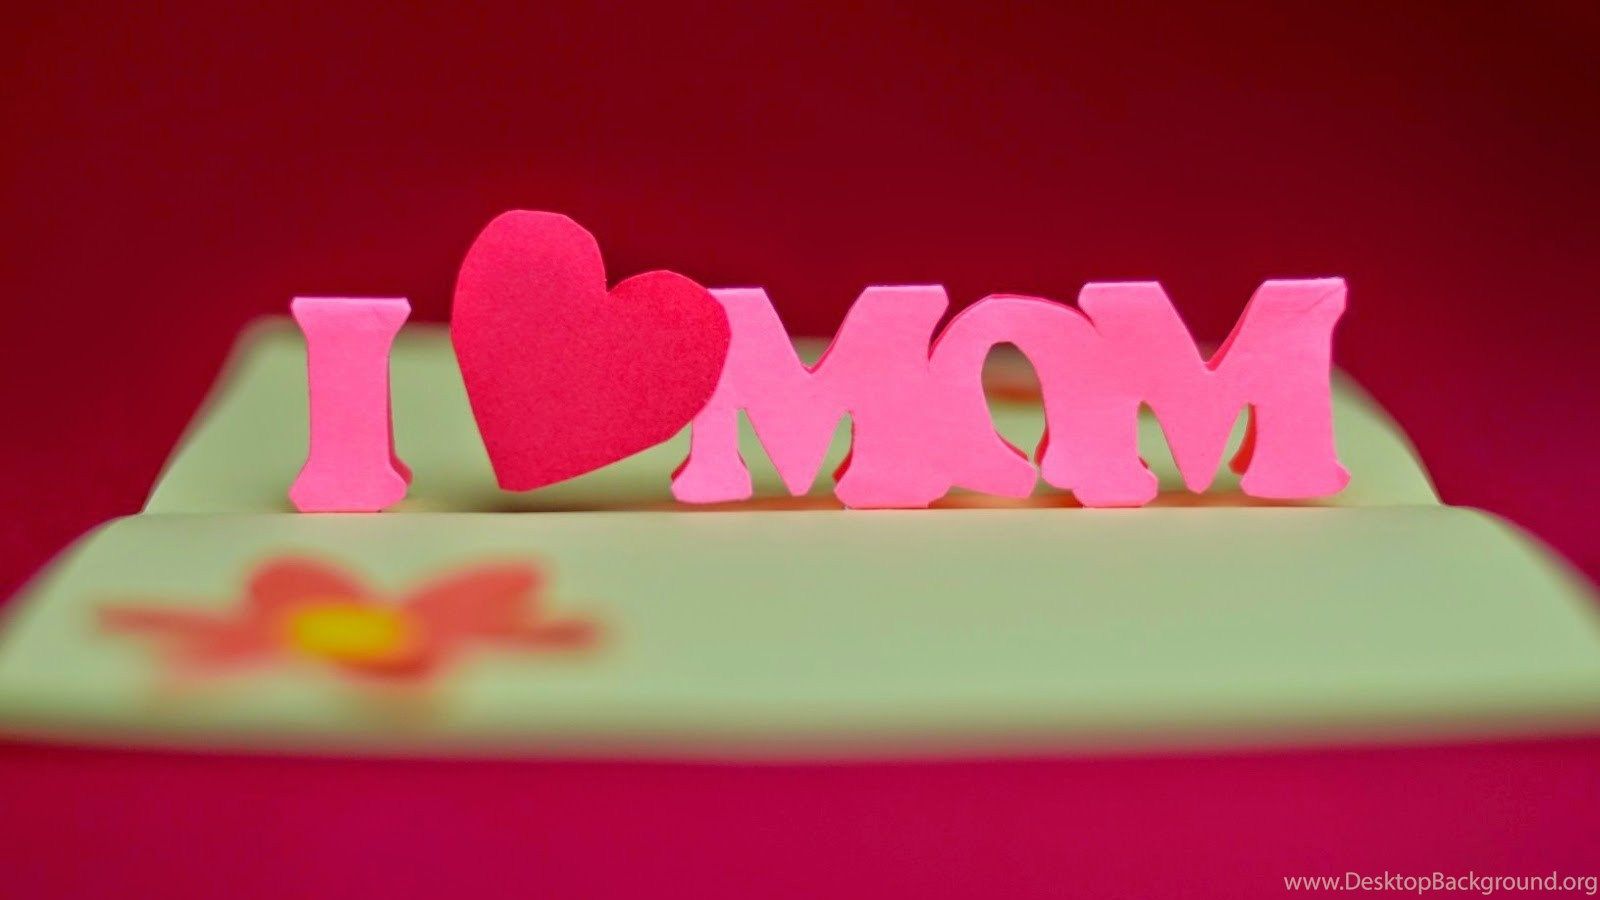 Happy Mothers Day Love Mom Wishes HD Wallpaper Desktop Background